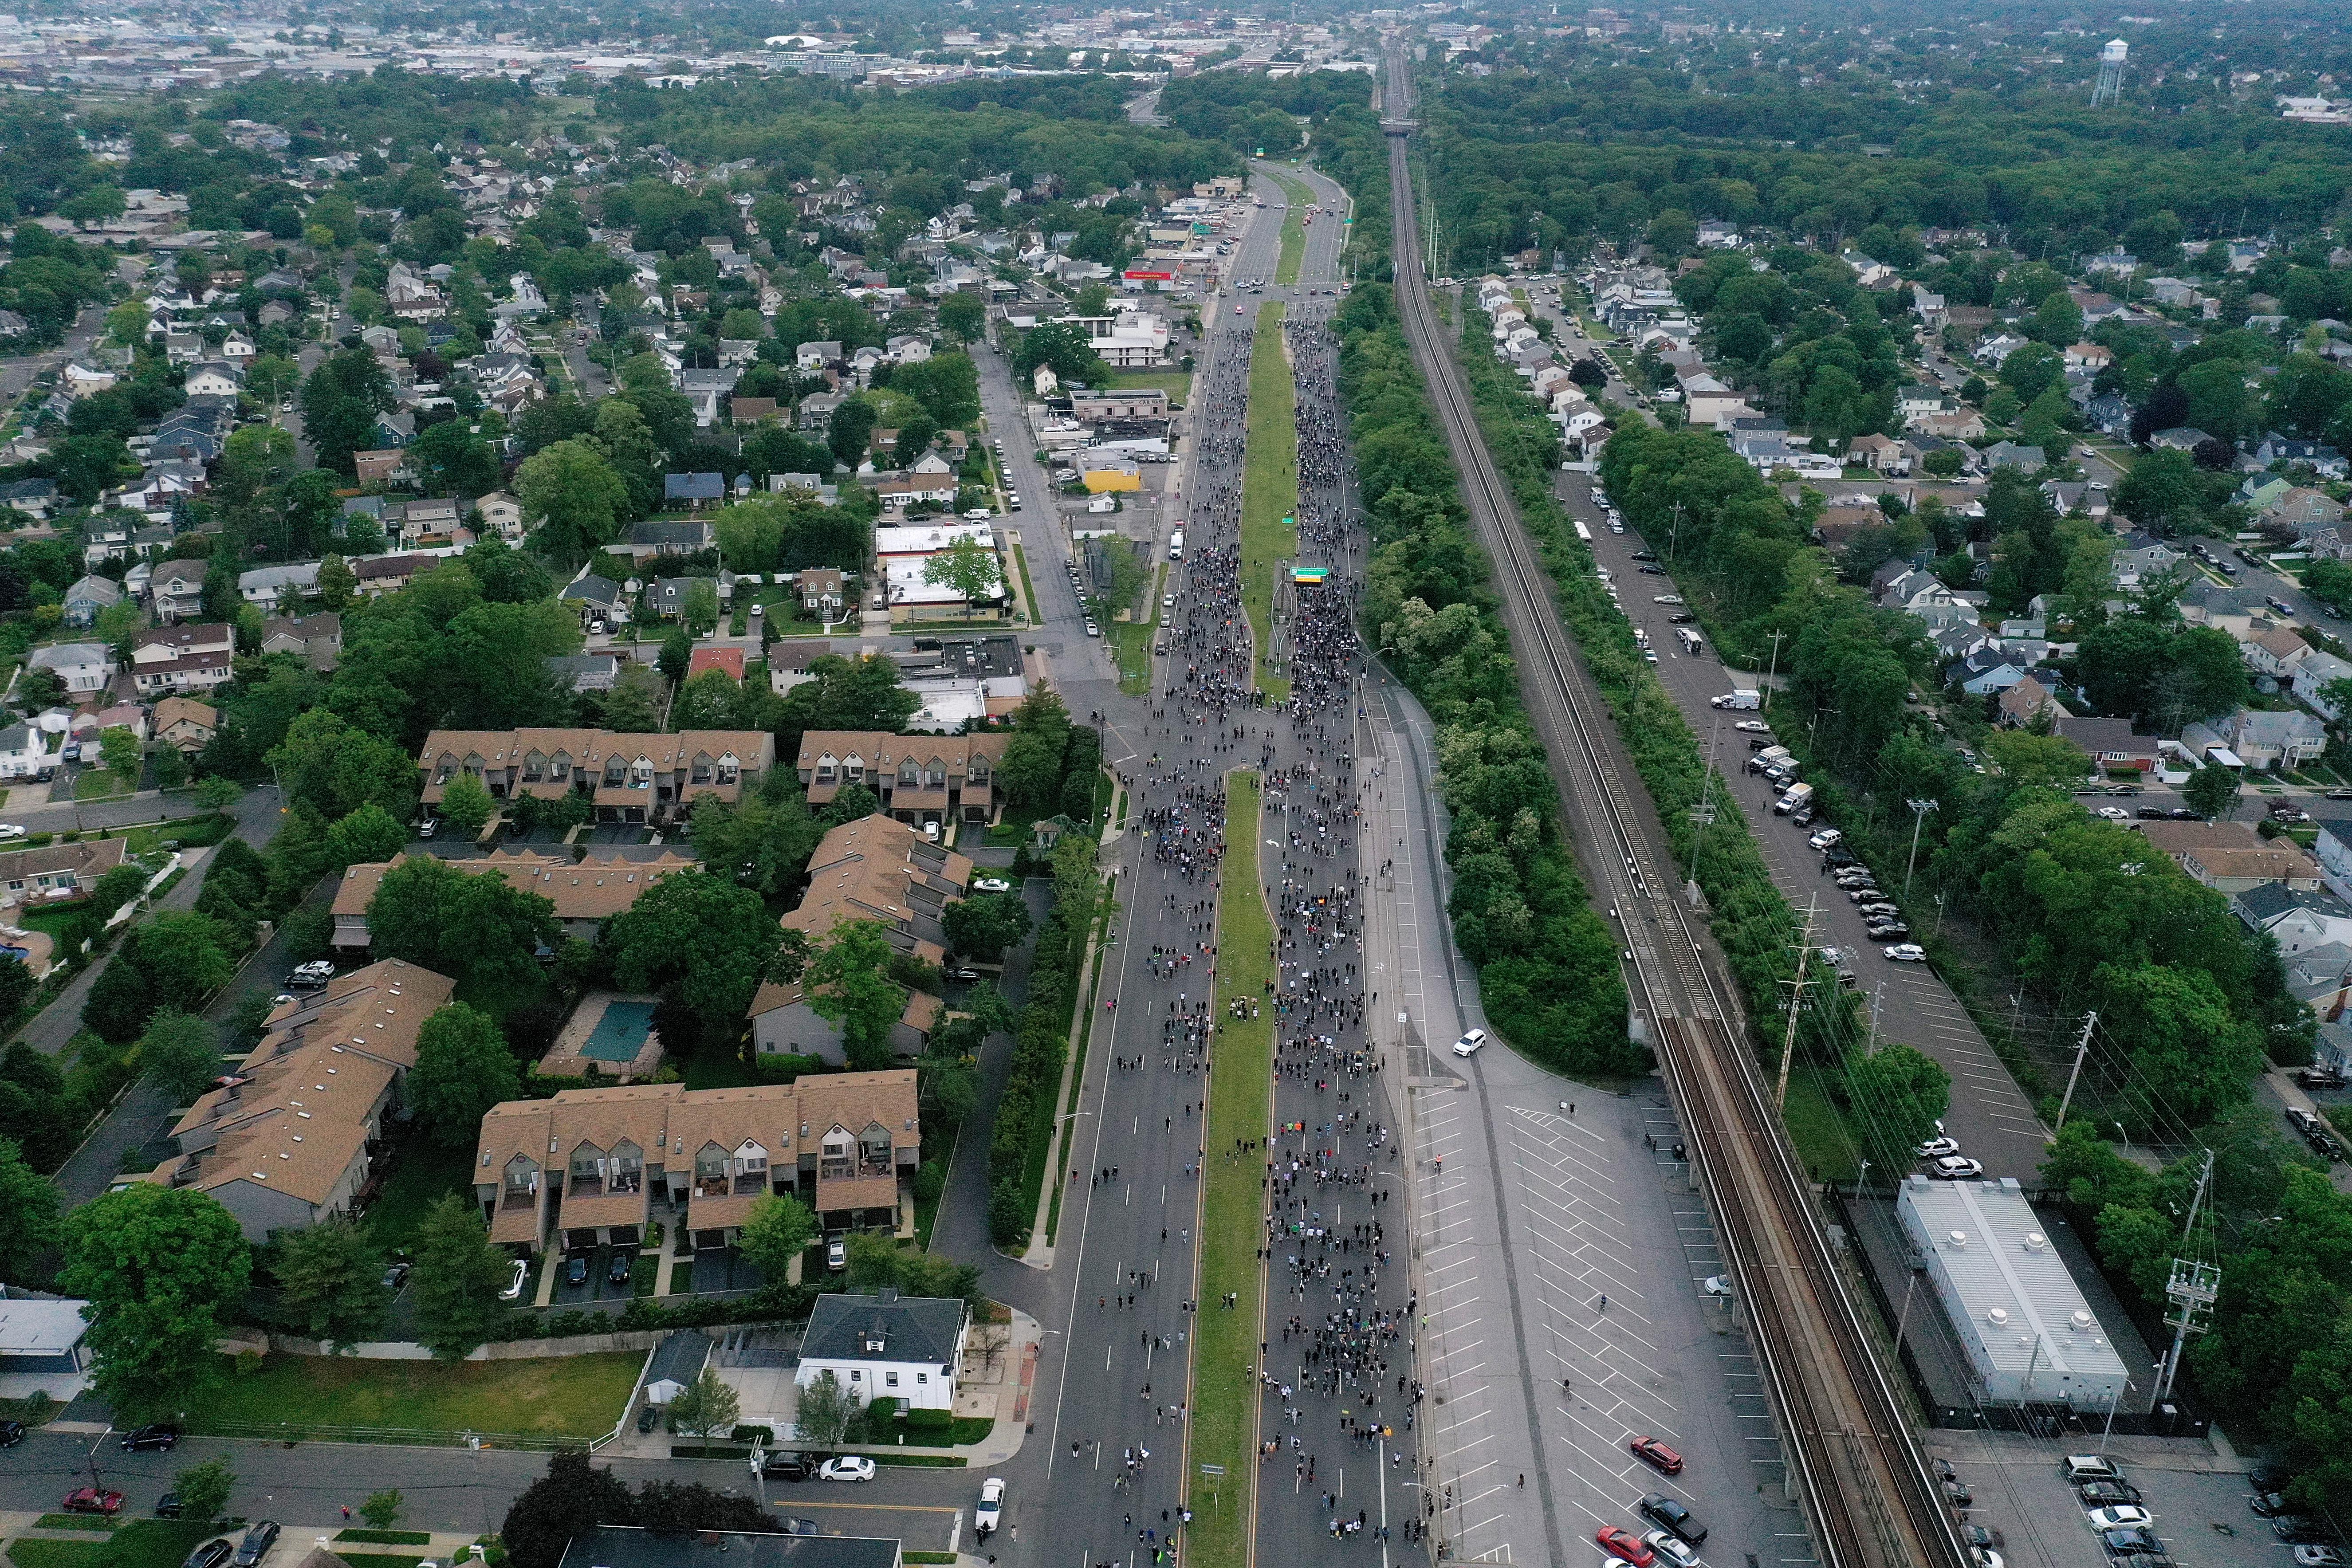 An aerial view of protesters marching down a large highway in Merrick, New York.